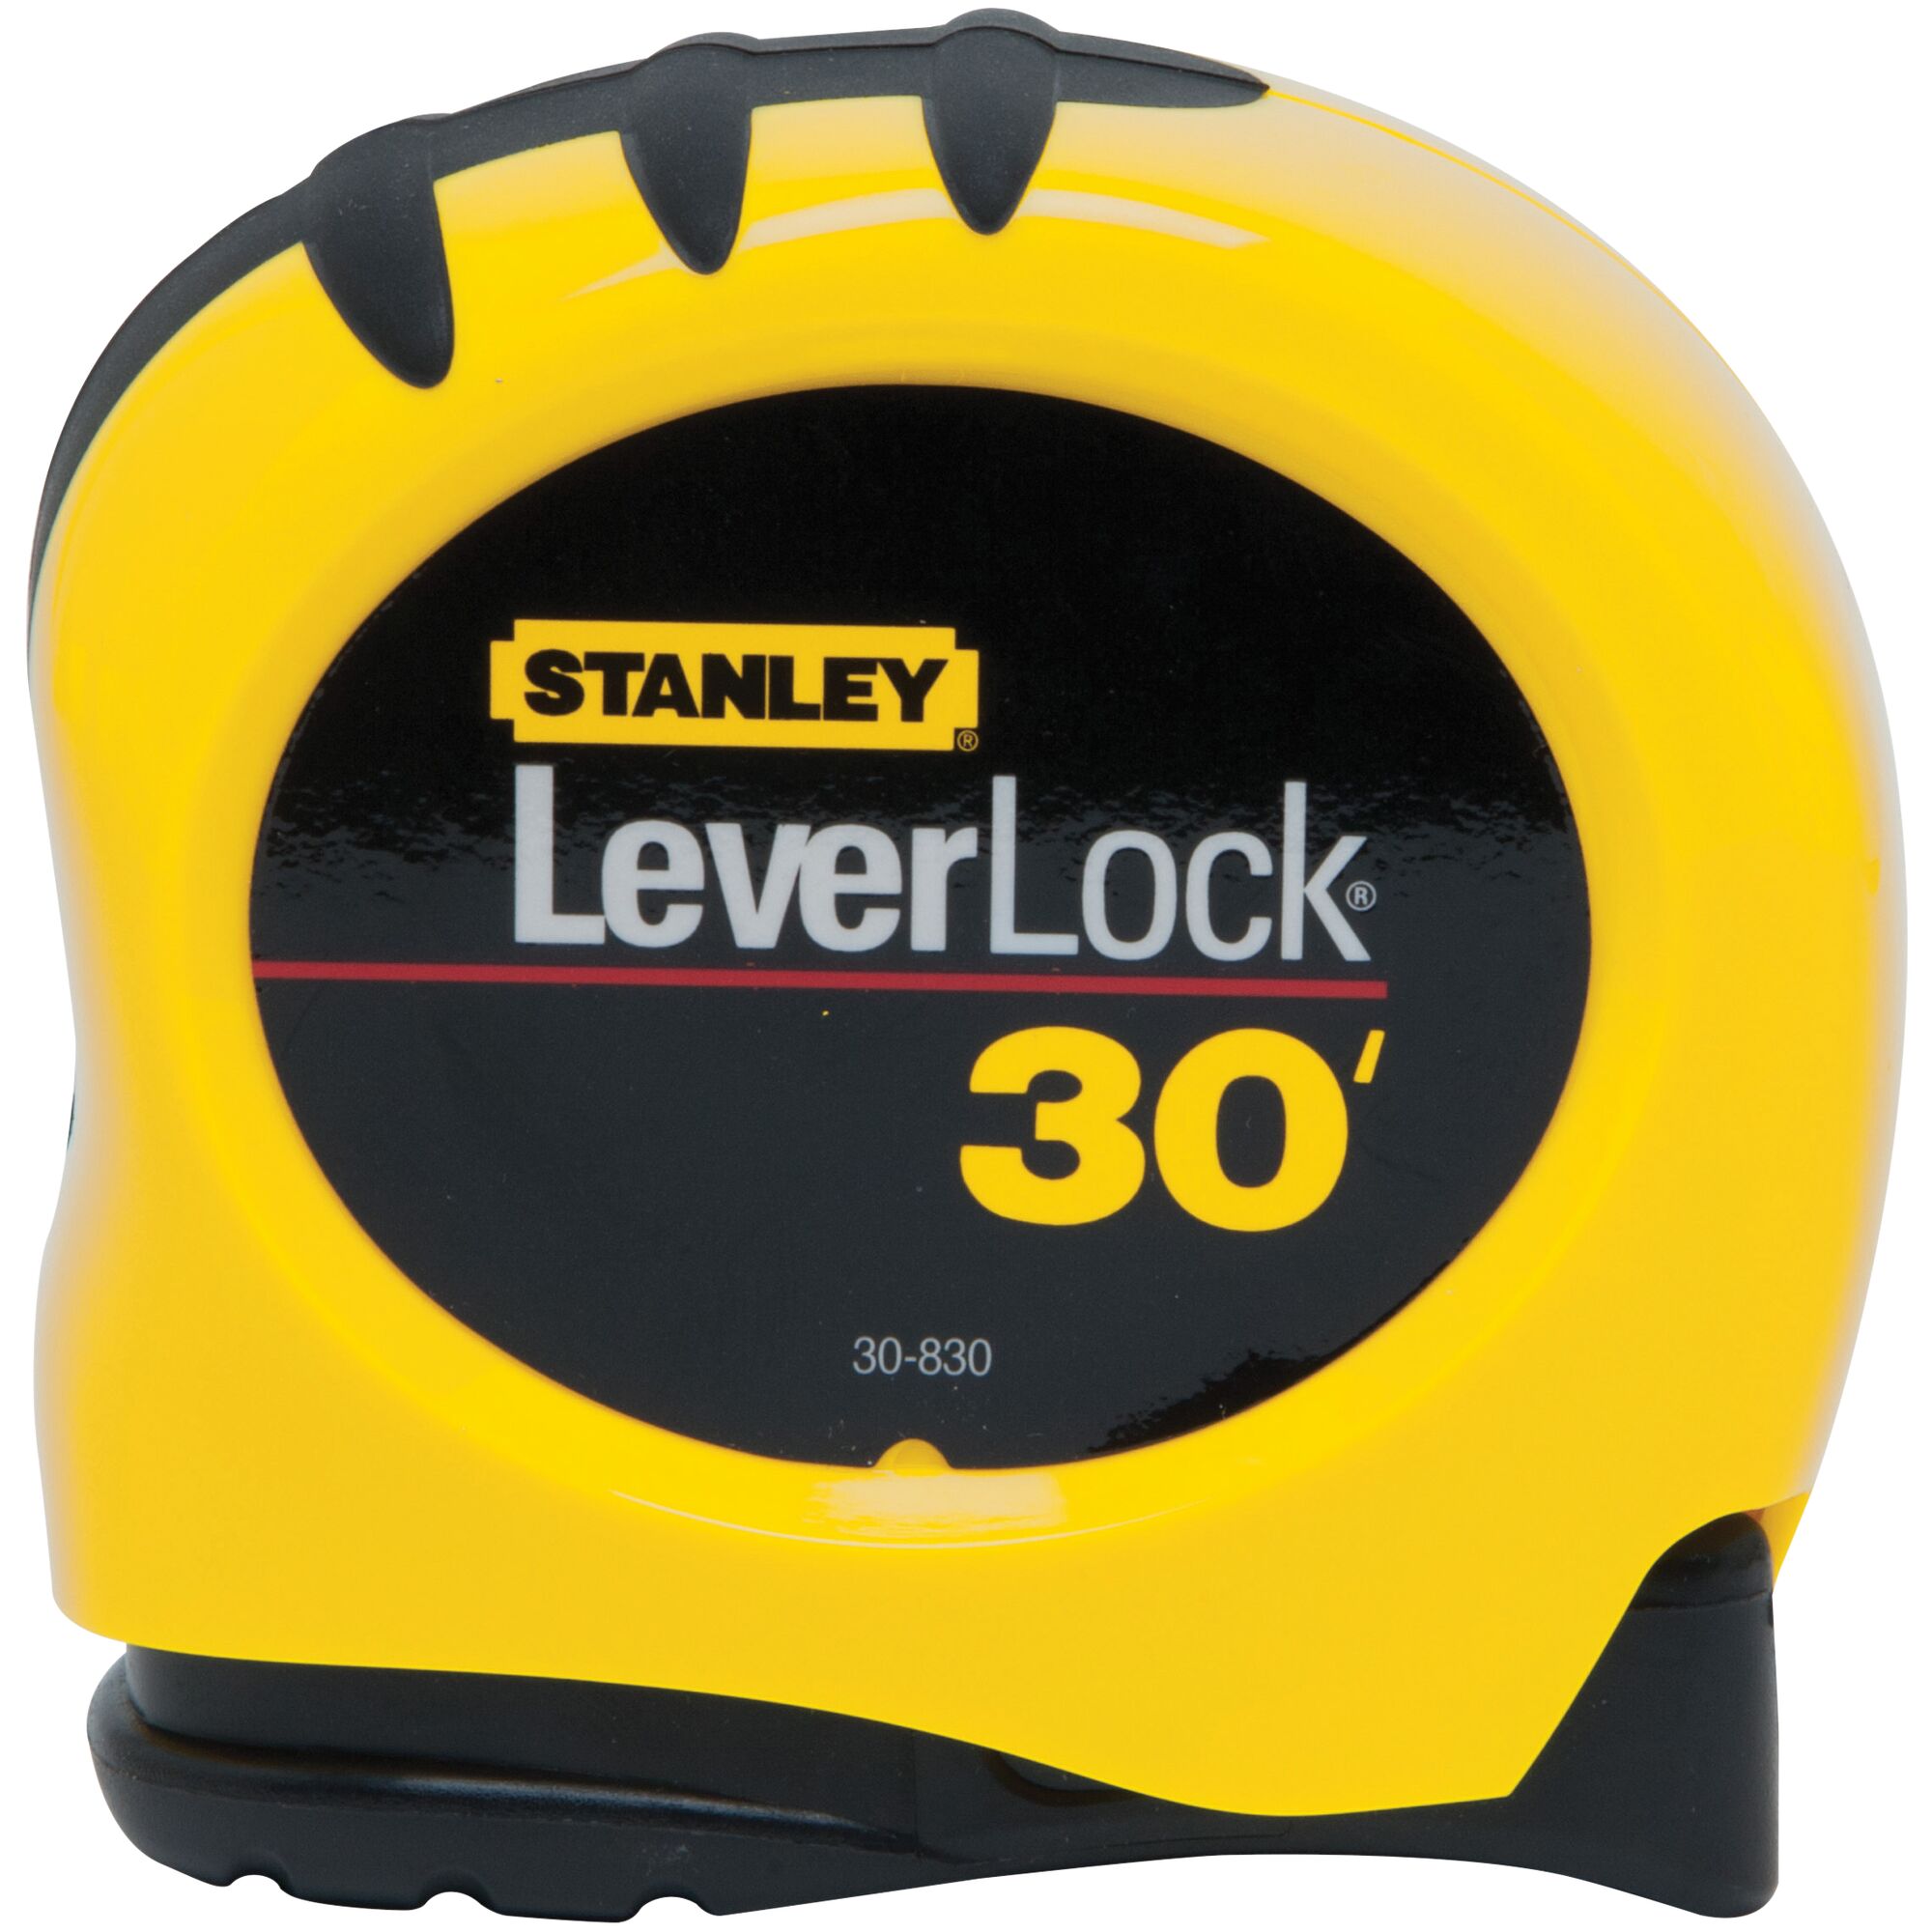 We are OFFERING a Stanley 30' LeverLock 1.5 Tape Measure New STHT30830 